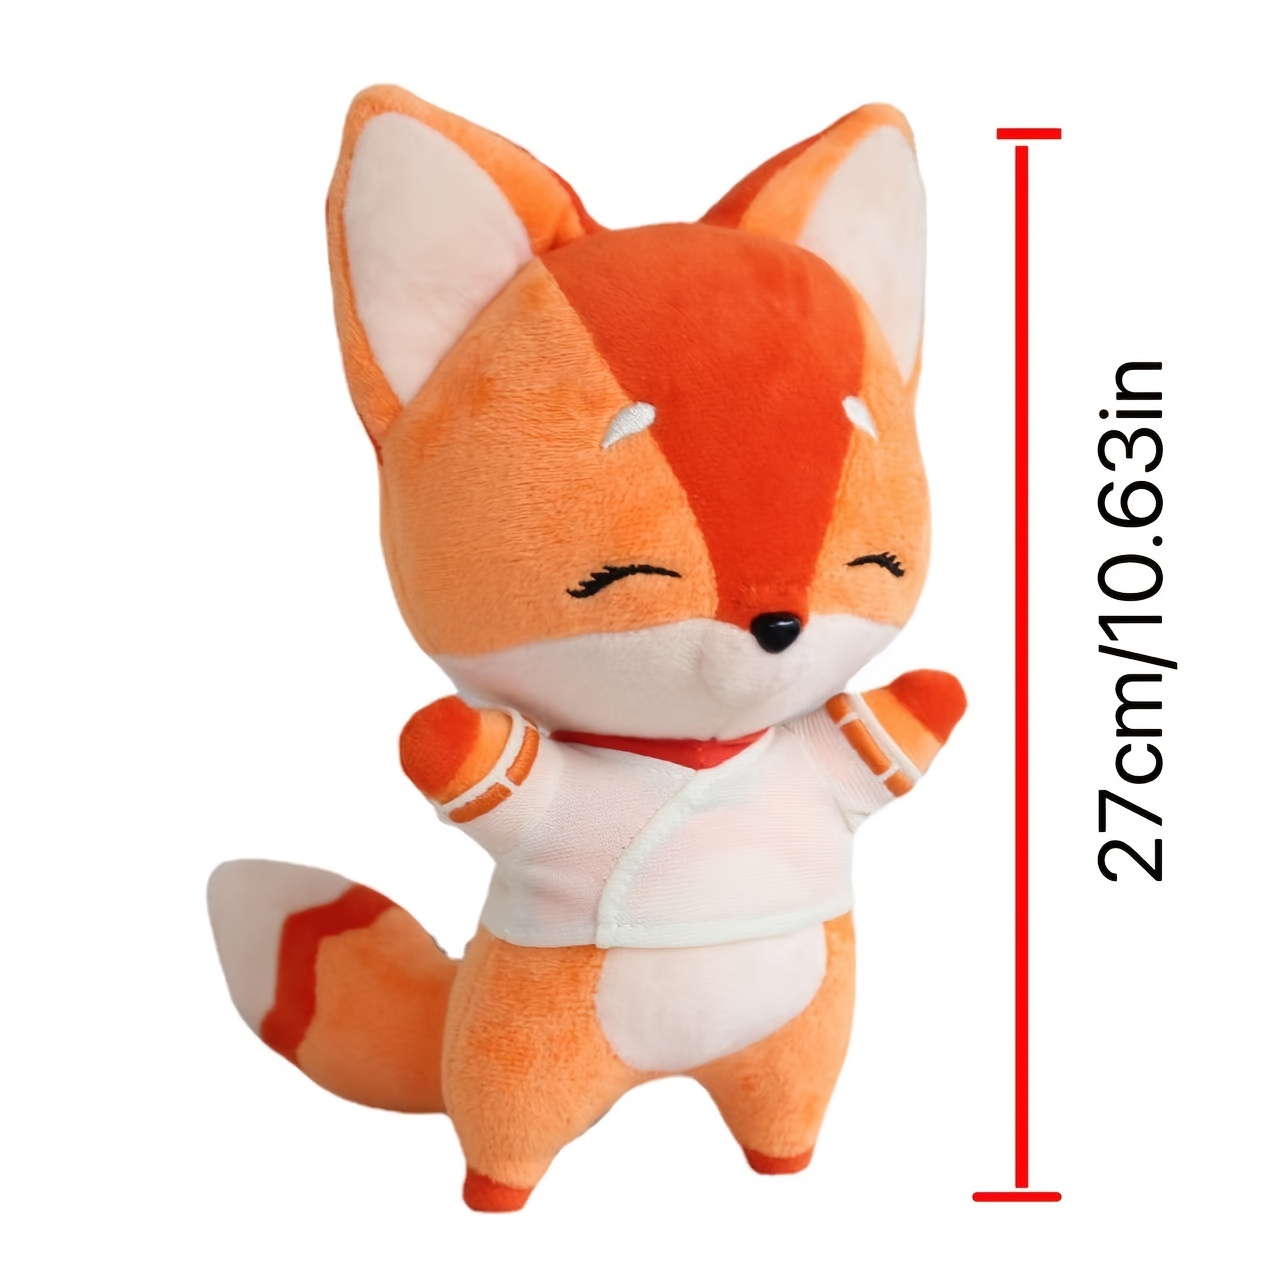 12 Tails doll ideas  tails doll, tailed, dolls